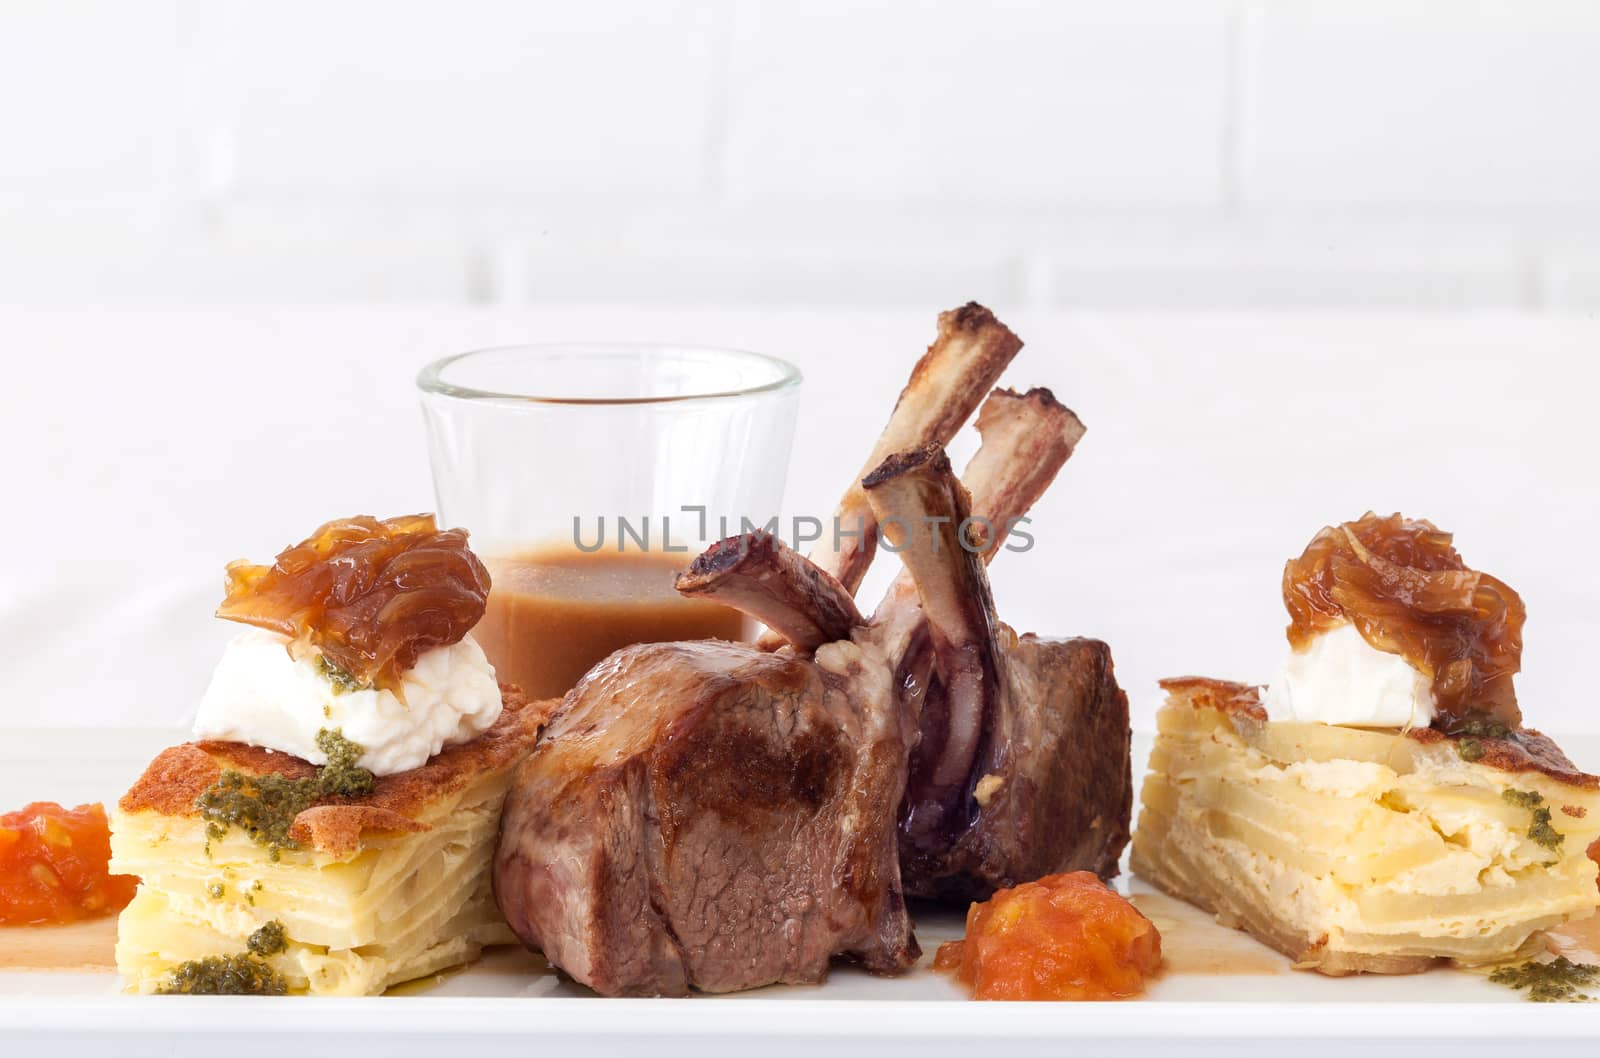 Roasted Lamb Chops on white background. by kerdkanno